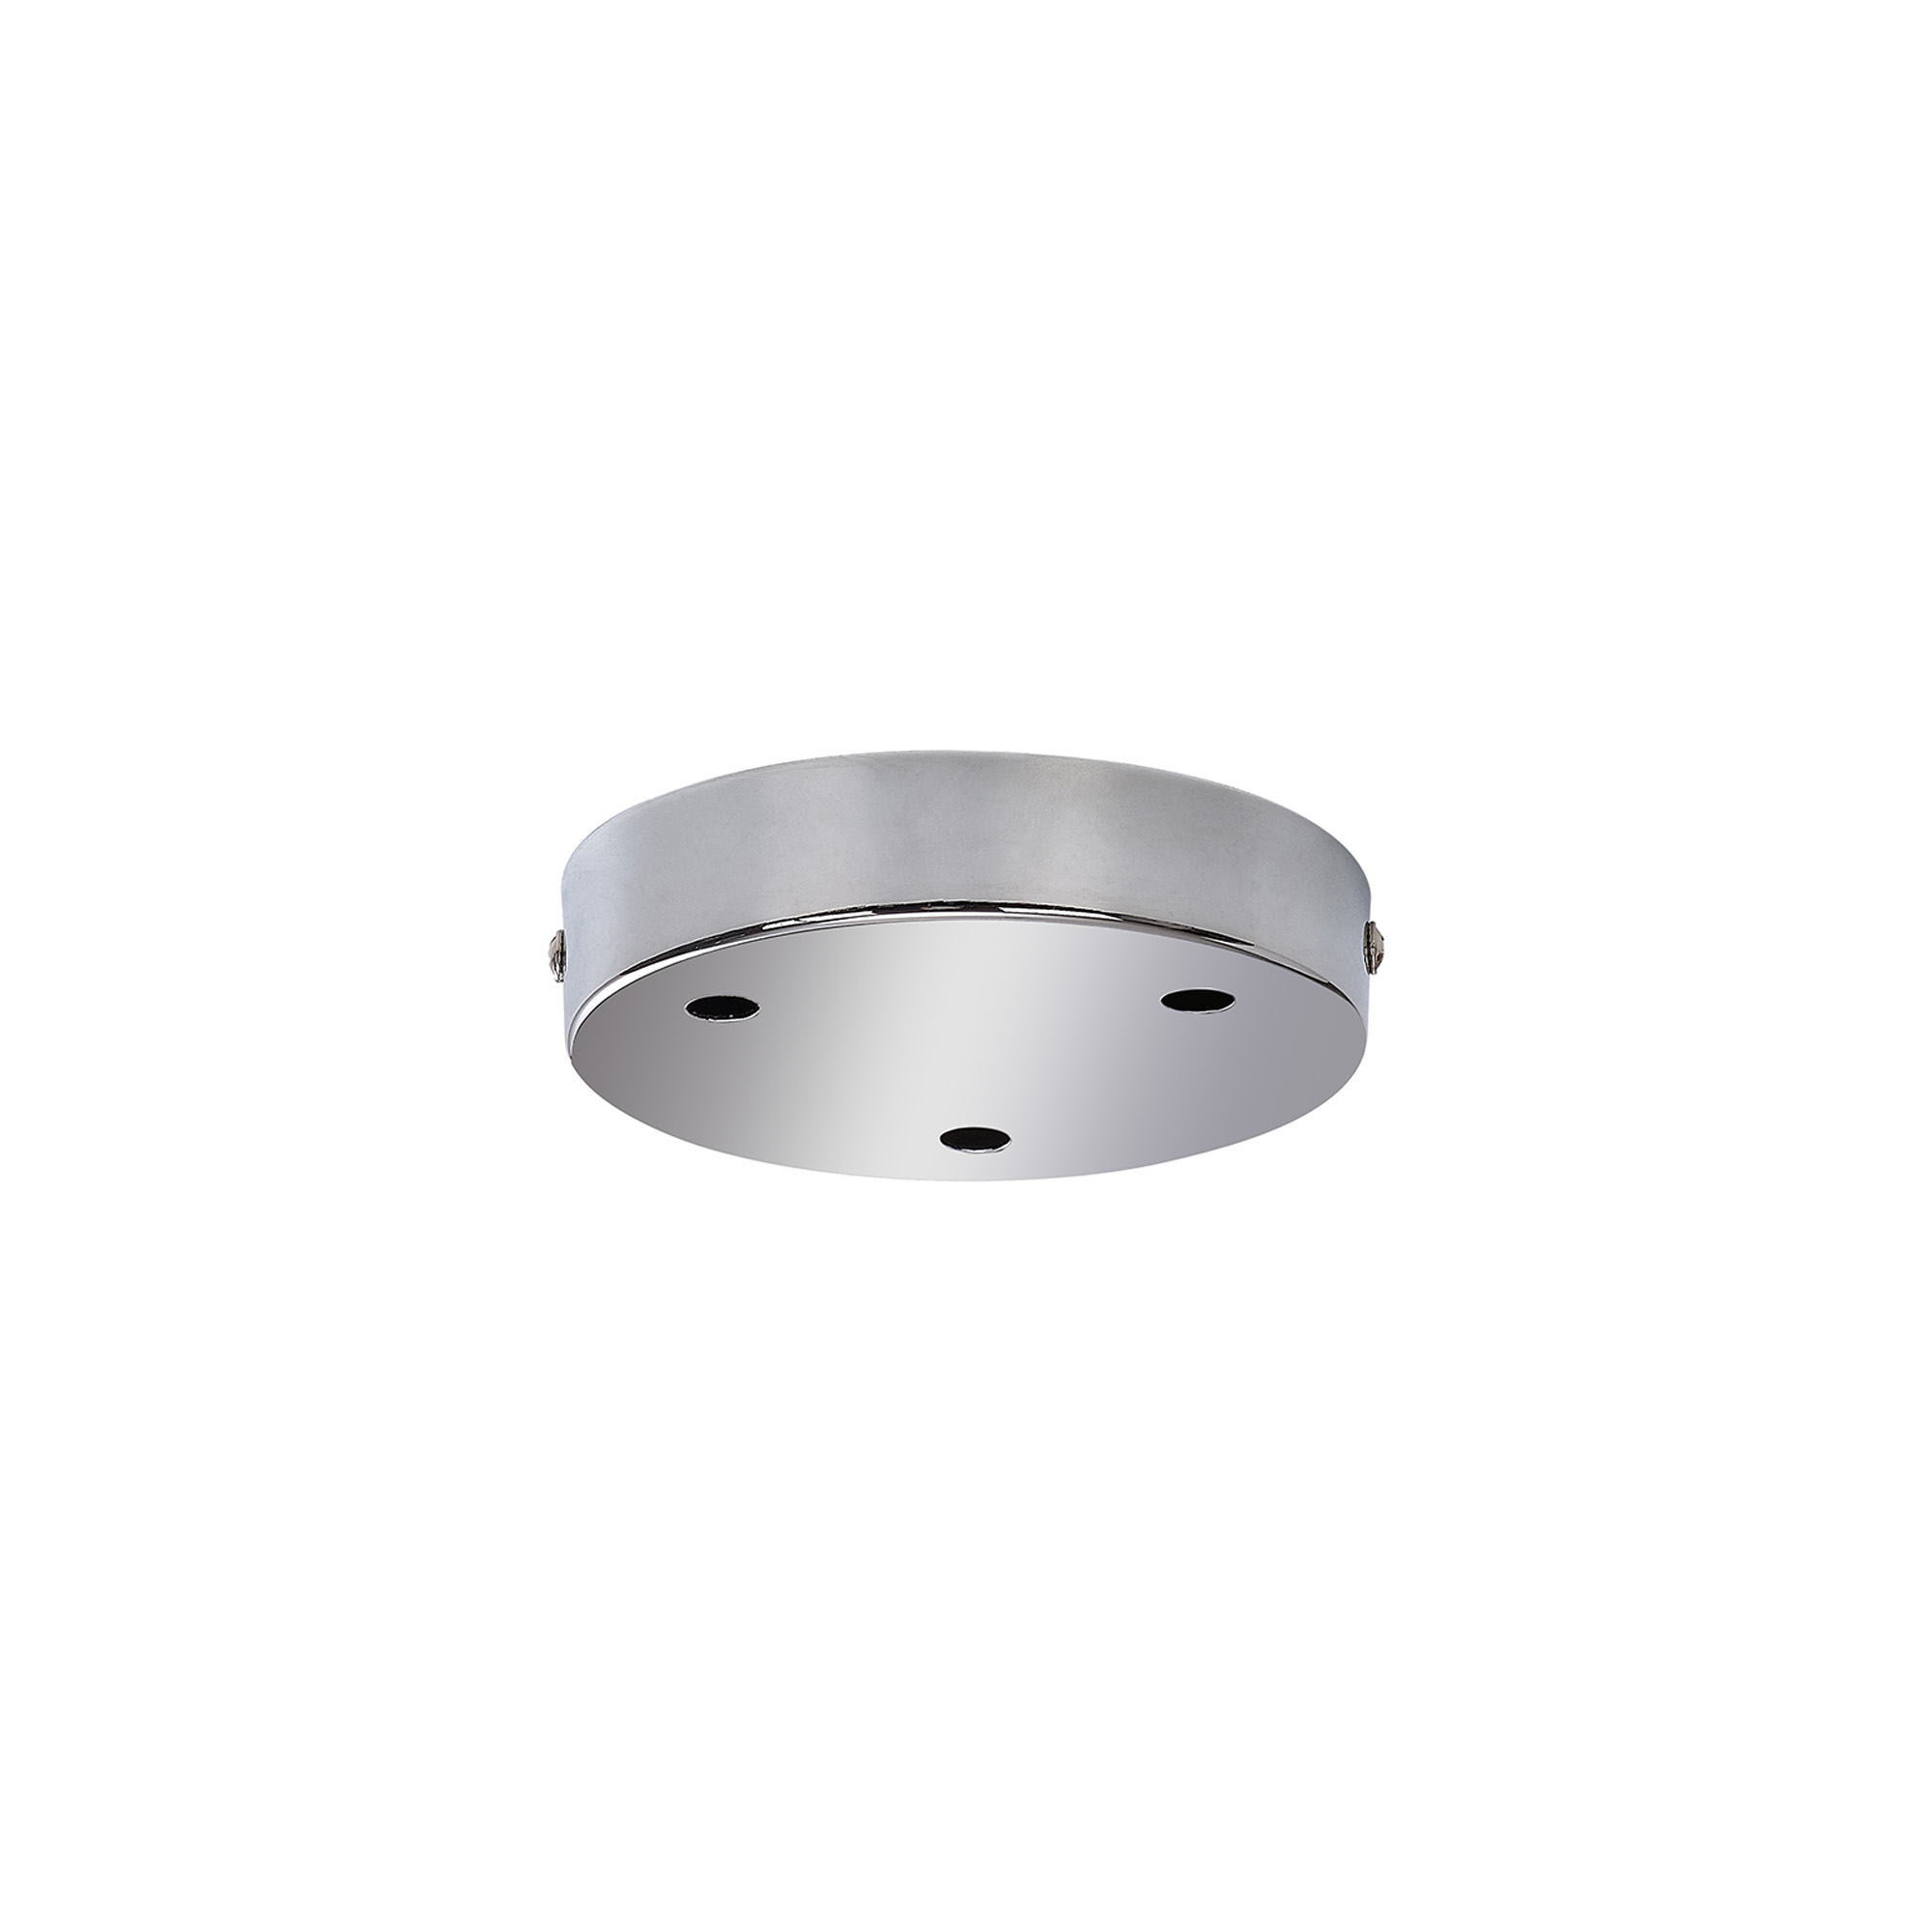 D0827CH  Hayes 3 Hole 12cm Round Ceiling Plate Polished Chrome